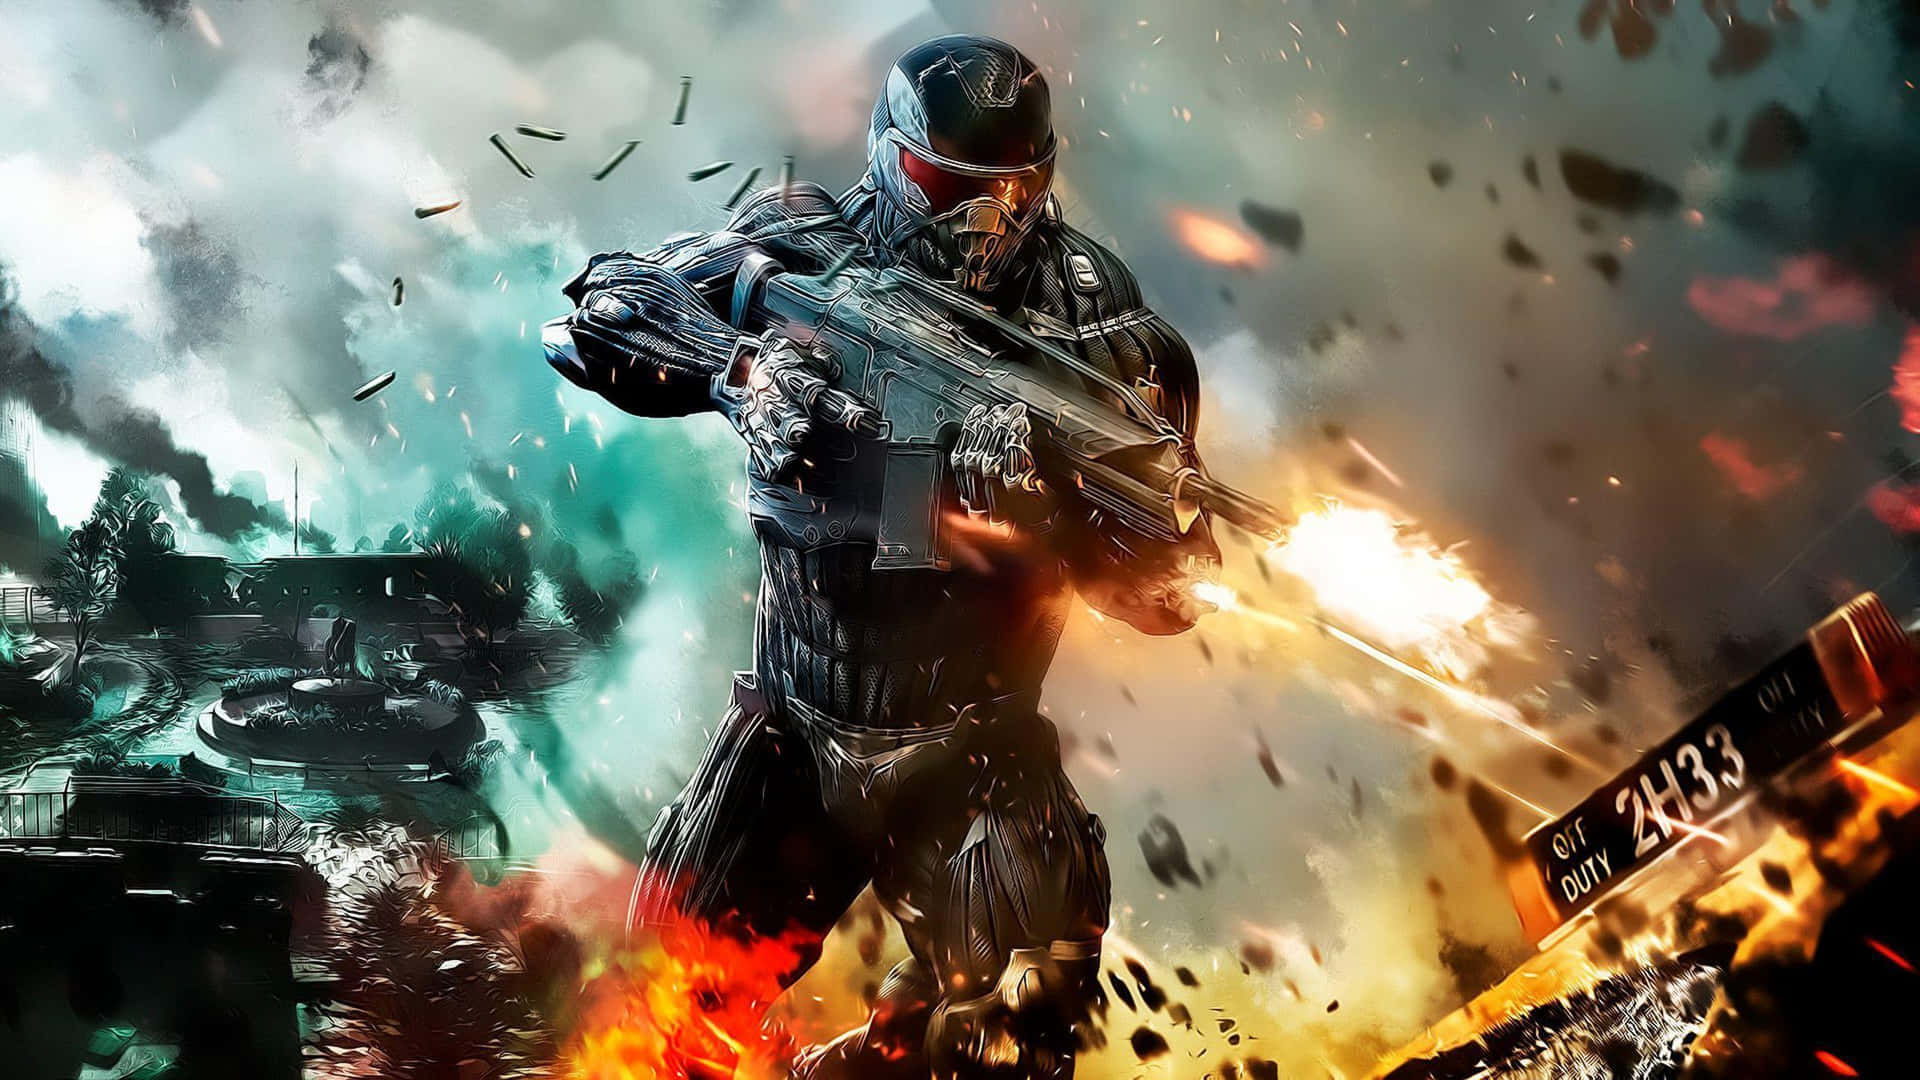 Prepare for Battle with Crysis HD Wallpaper